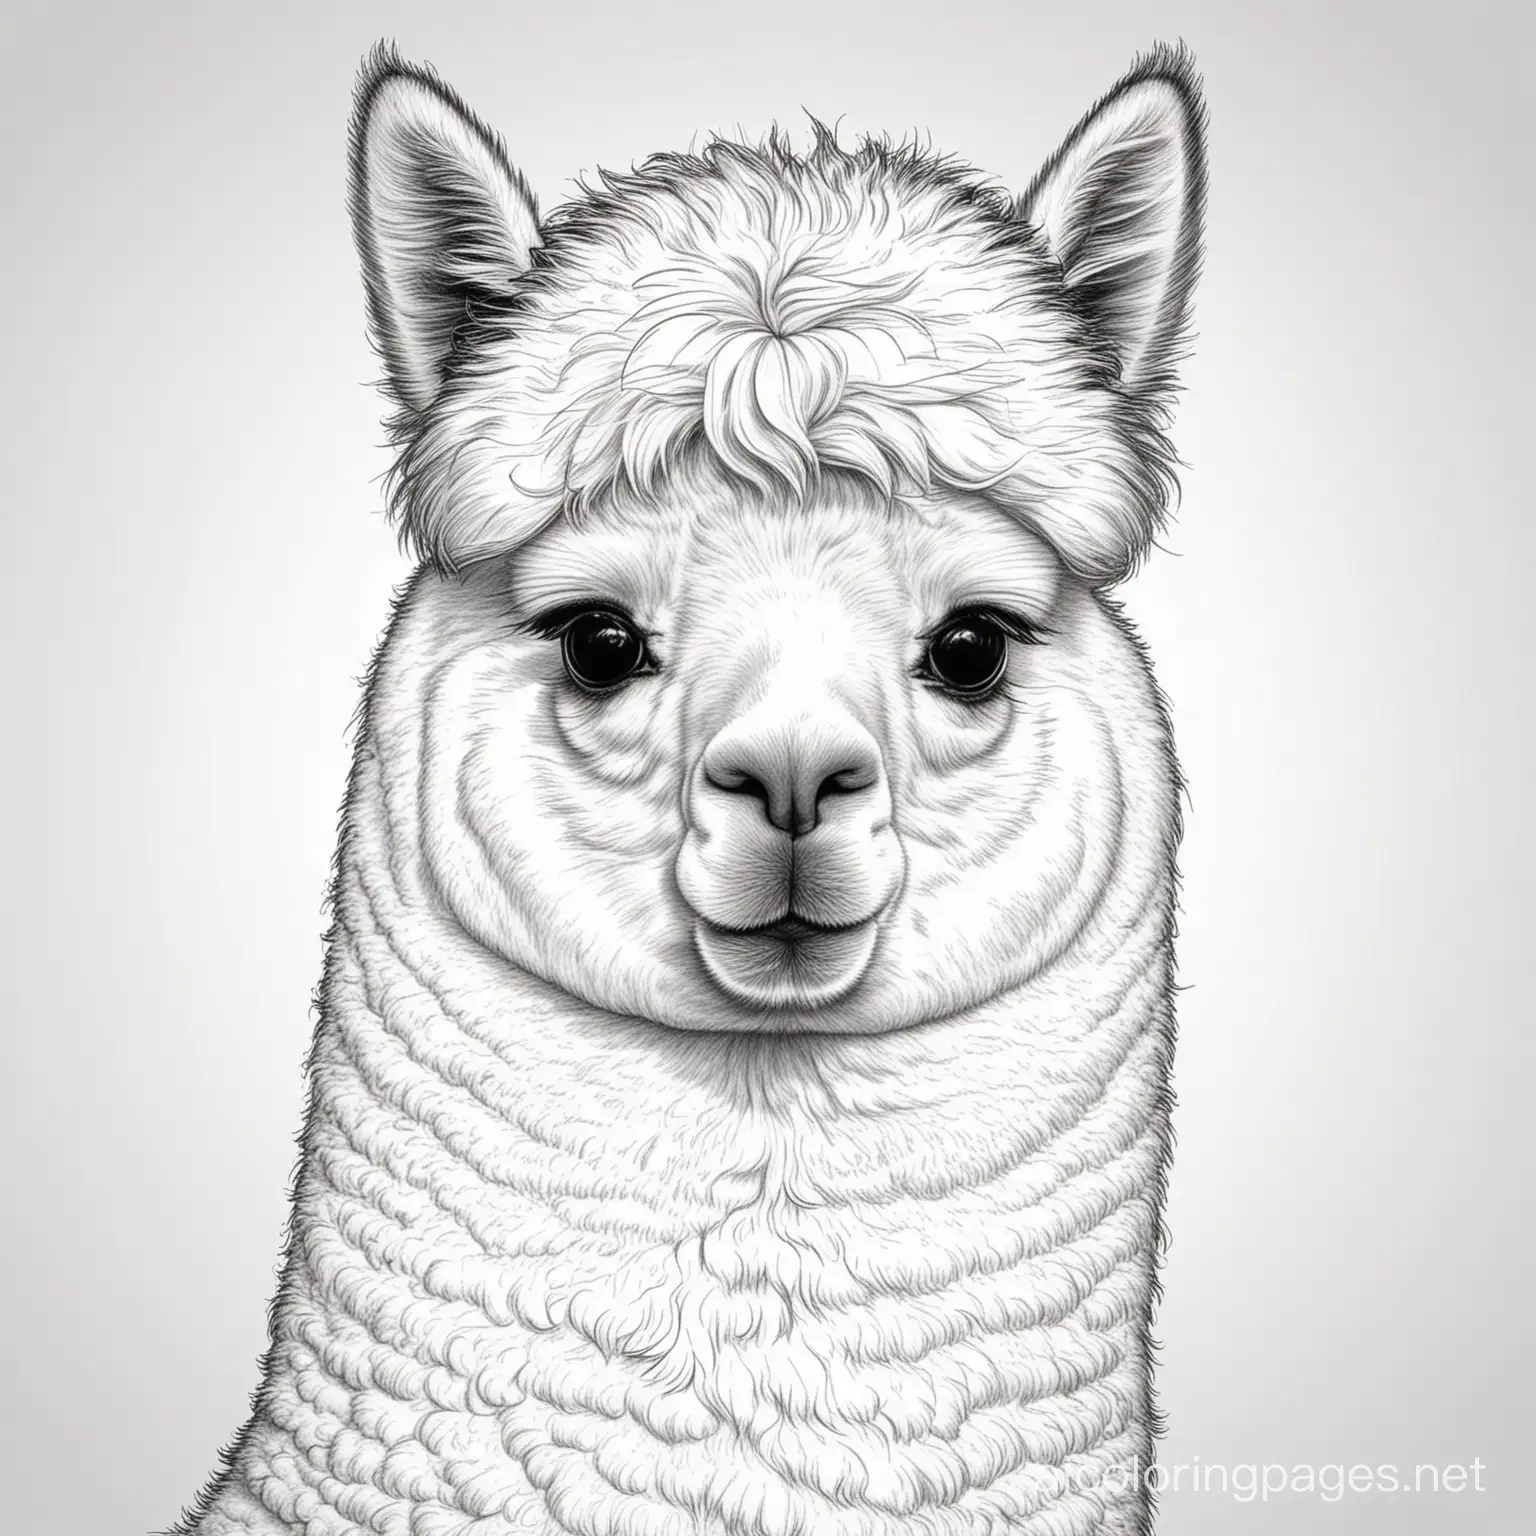 ALPACA PORTRAIT

, Coloring Page, black and white, line art, white background, Simplicity, Ample White Space. The background of the coloring page is plain white to make it easy for young children to color within the lines. The outlines of all the subjects are easy to distinguish, making it simple for kids to color without too much difficulty